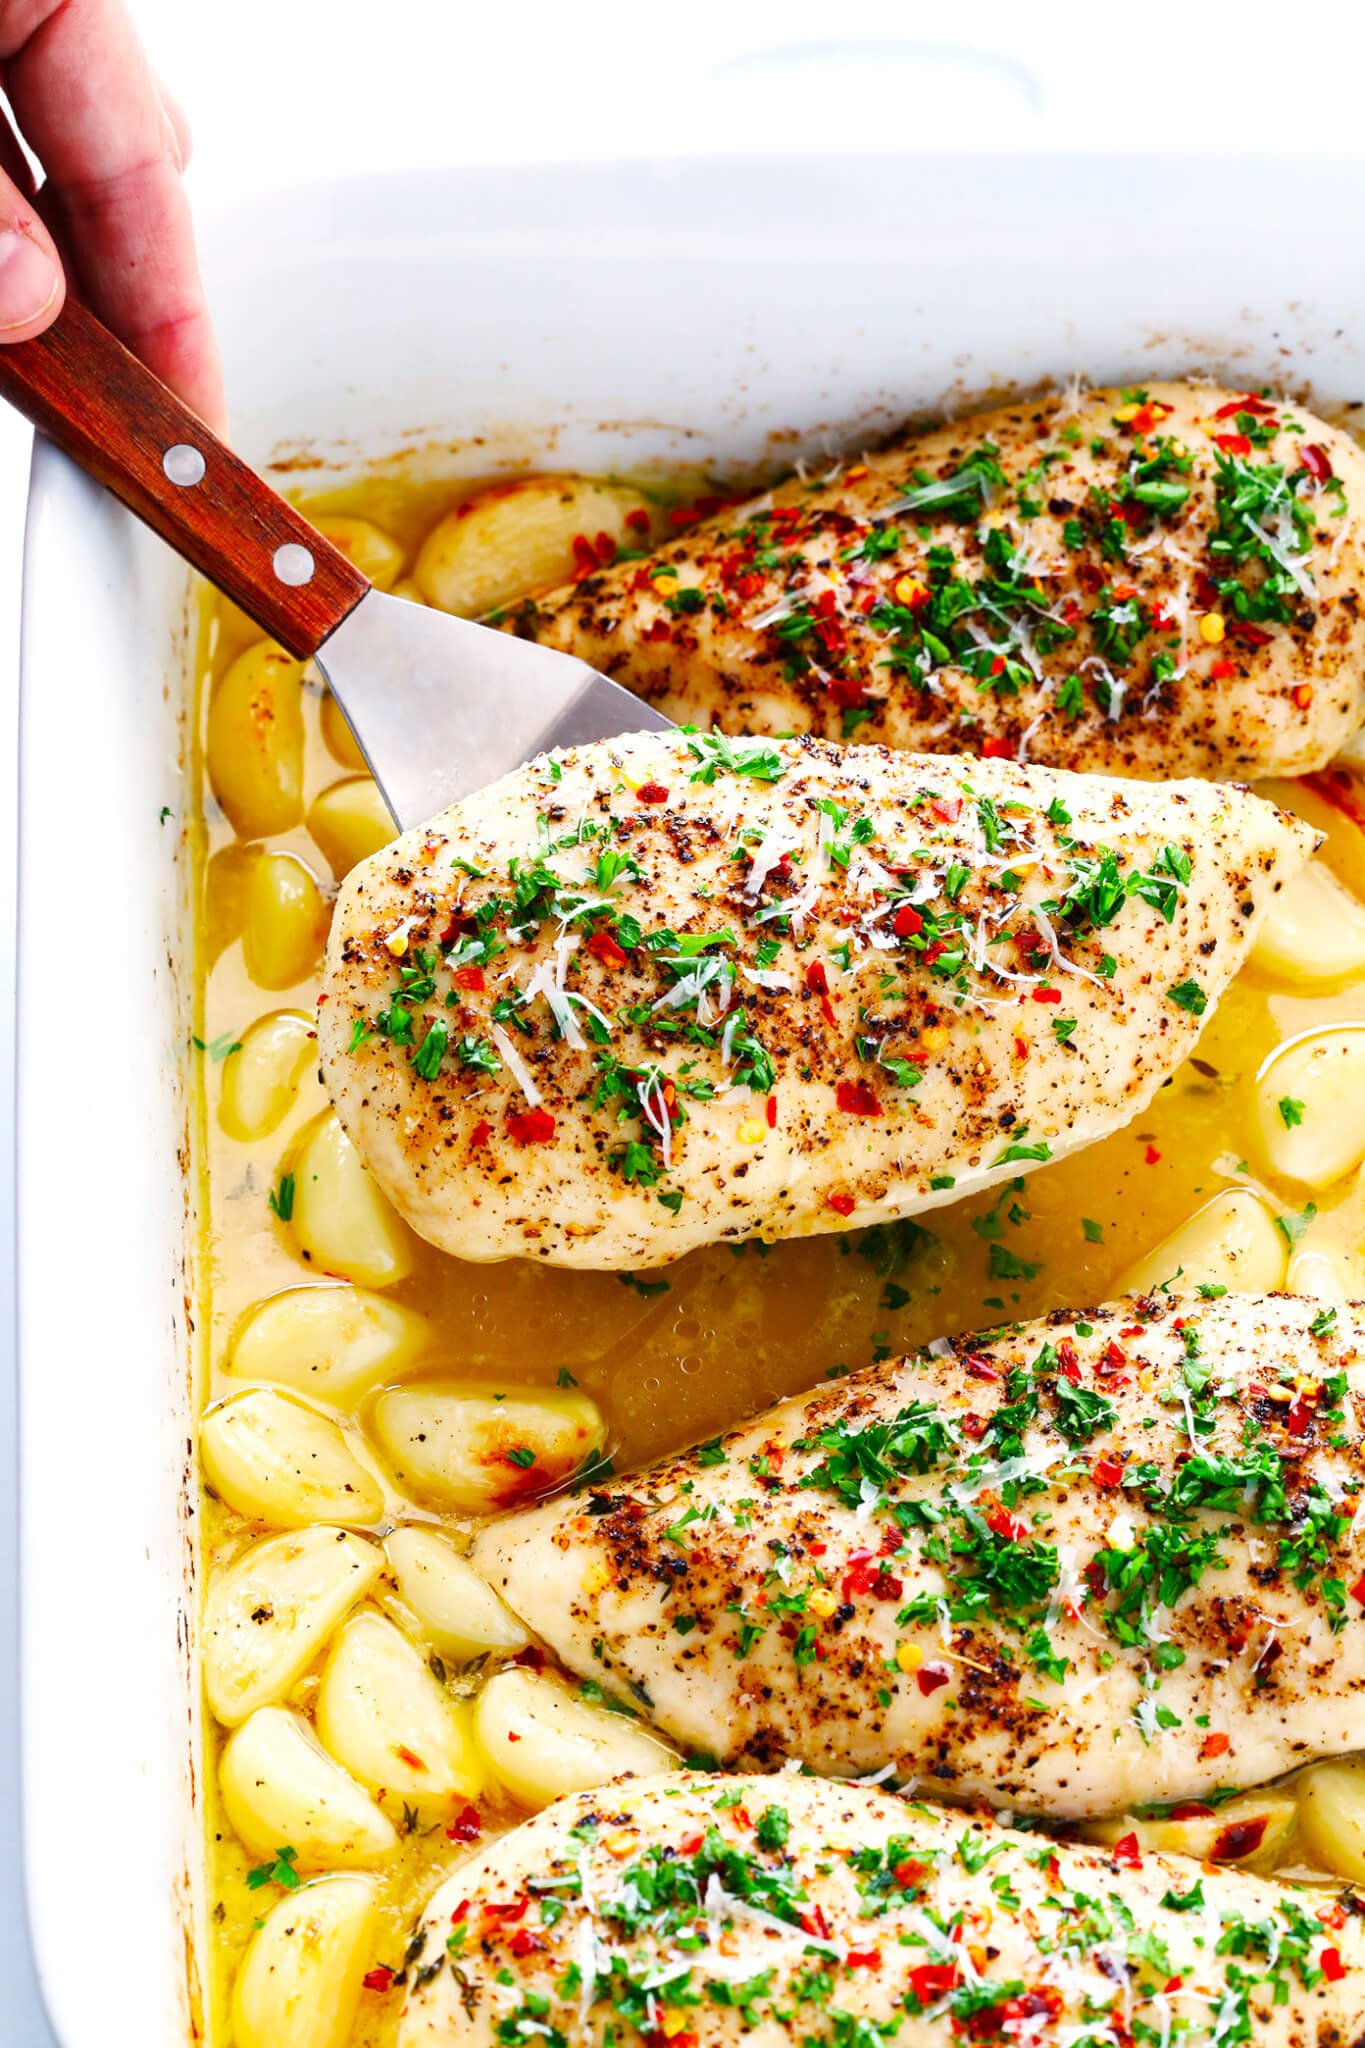 This Garlic Lovers Baked Chicken recipe is quick and easy to prepare, it's baked in the oven with a delicious lemon-butter sauce, and it's made with 40 cloves of garlic that are roasted to perfection. It's also naturally gluten-free, and SO delicious. An awesome weeknight dinner idea!